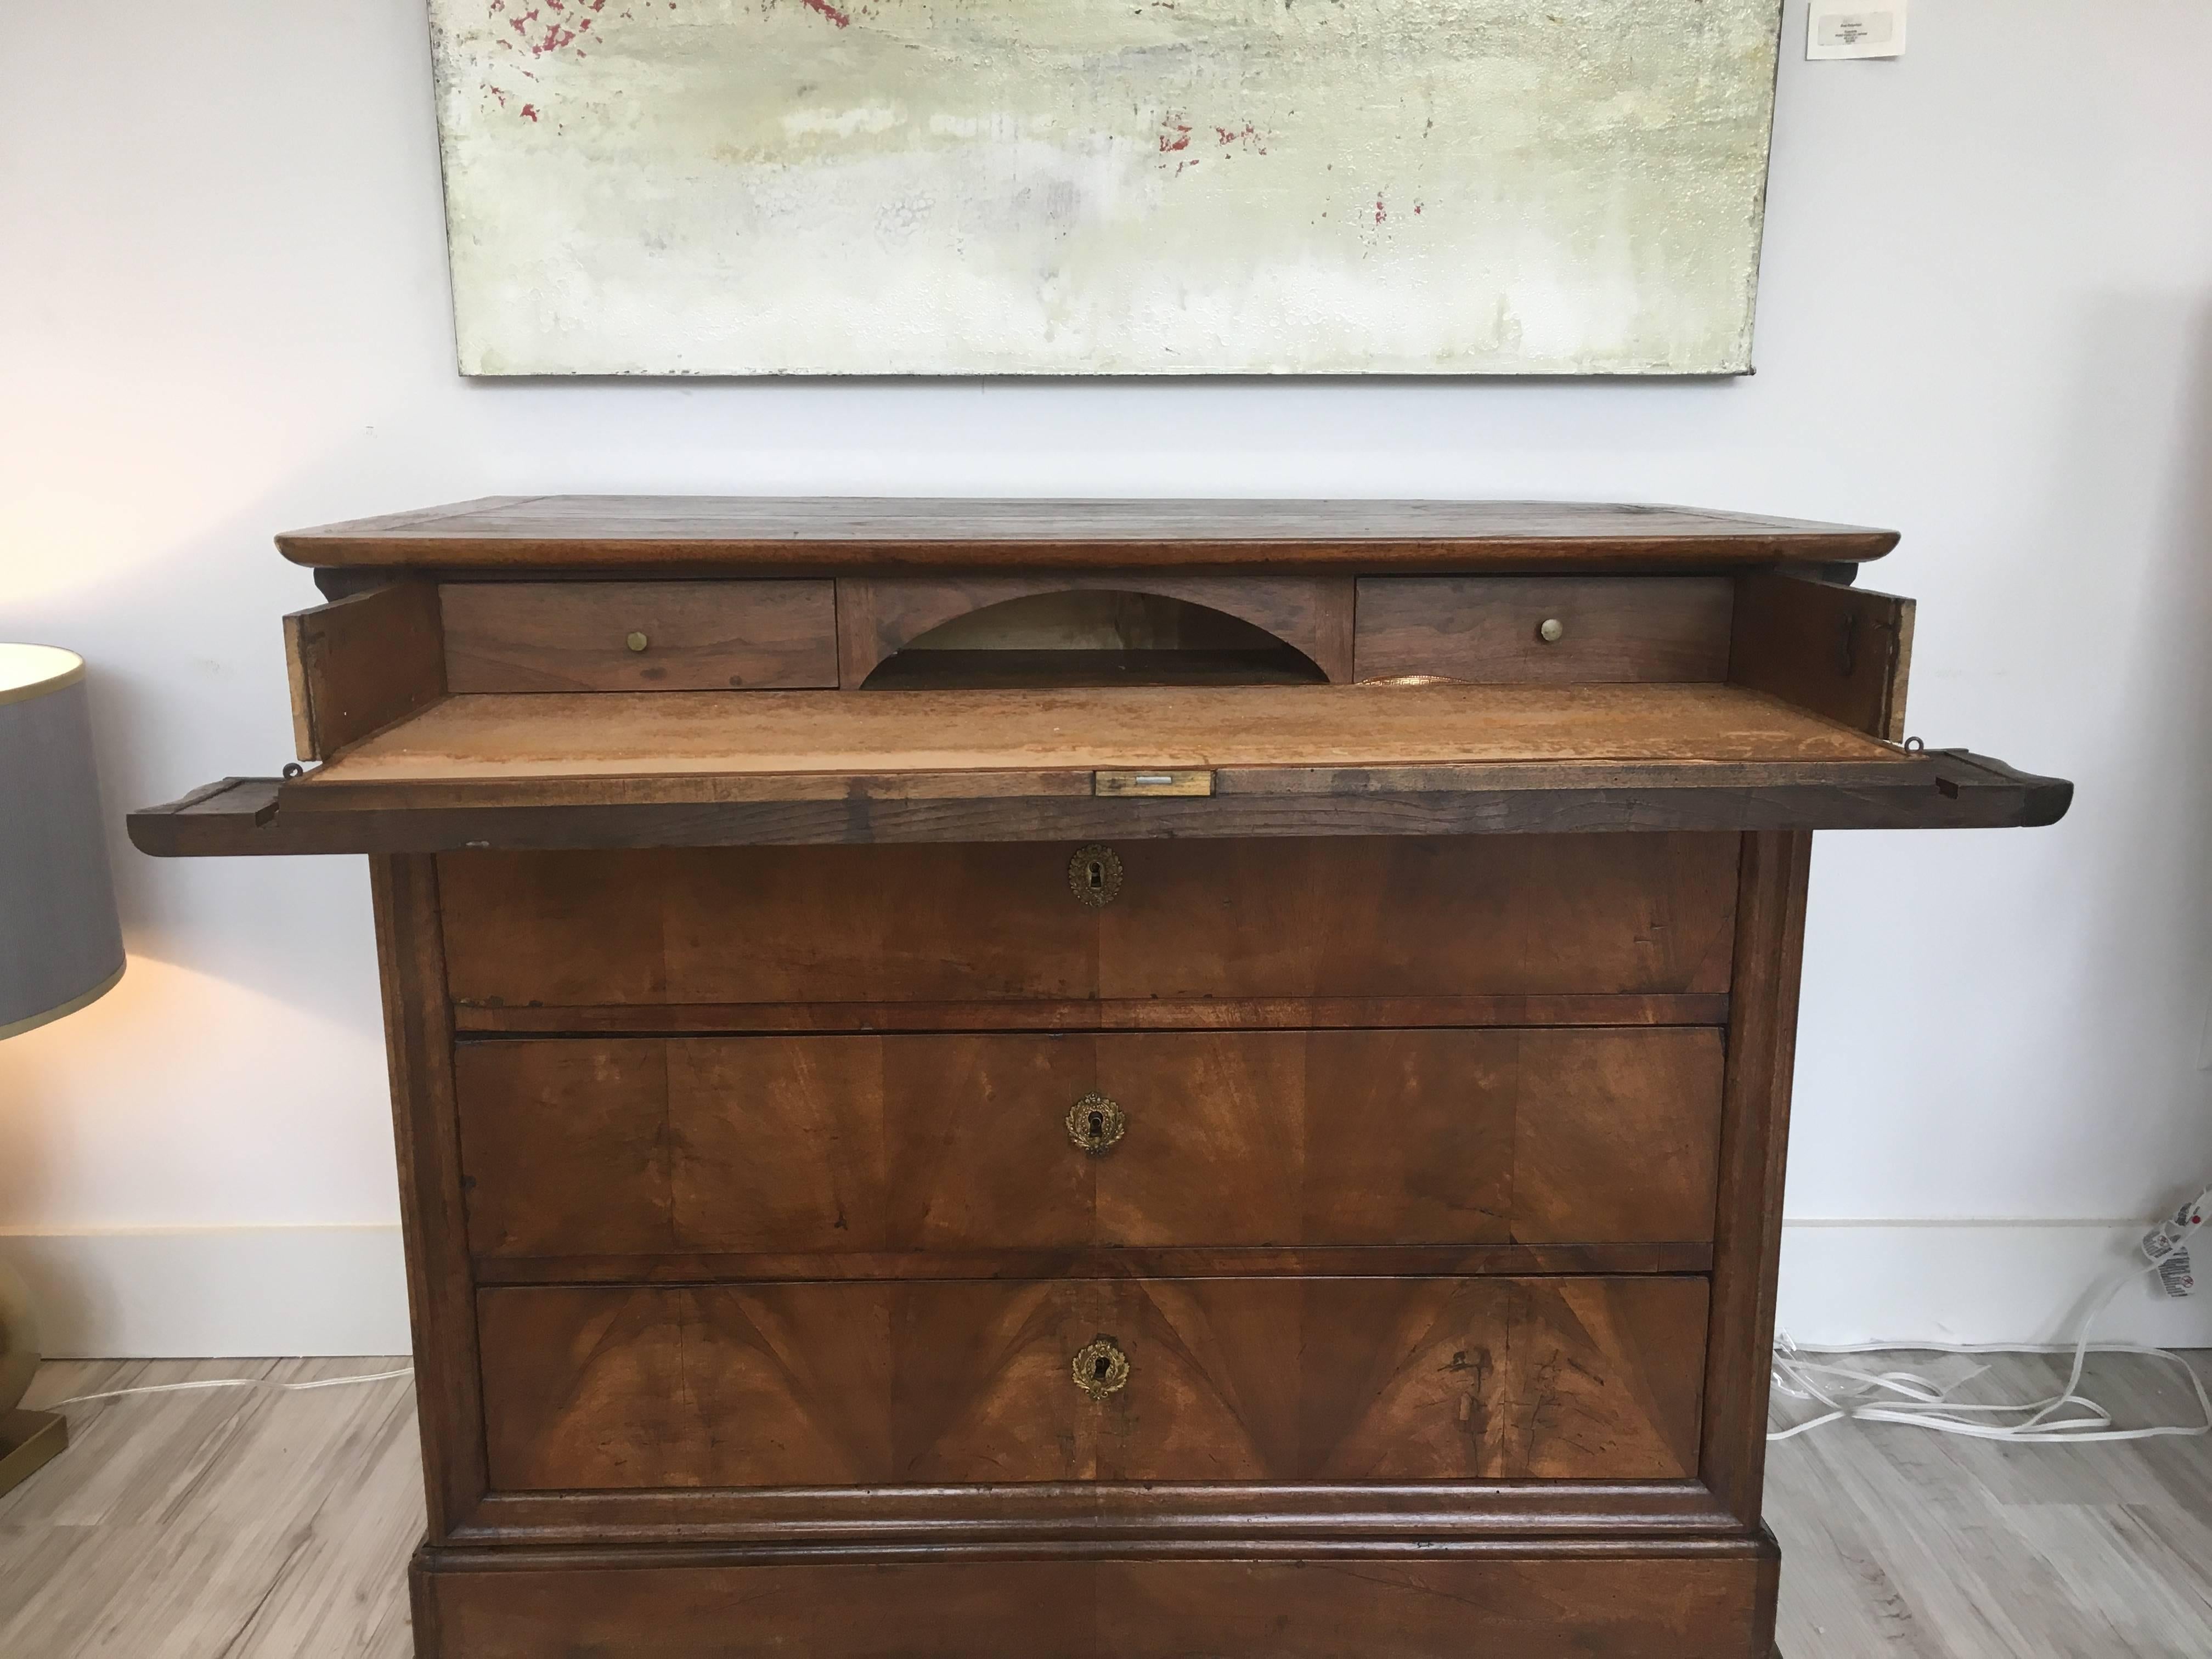 This French Louis Philippe style walnut commode features a rectangular top with rounded corners in the front over three deep drawers, topped by a pull-out desk section with drop-down front and a grey key frieze inside. The perfect combination of